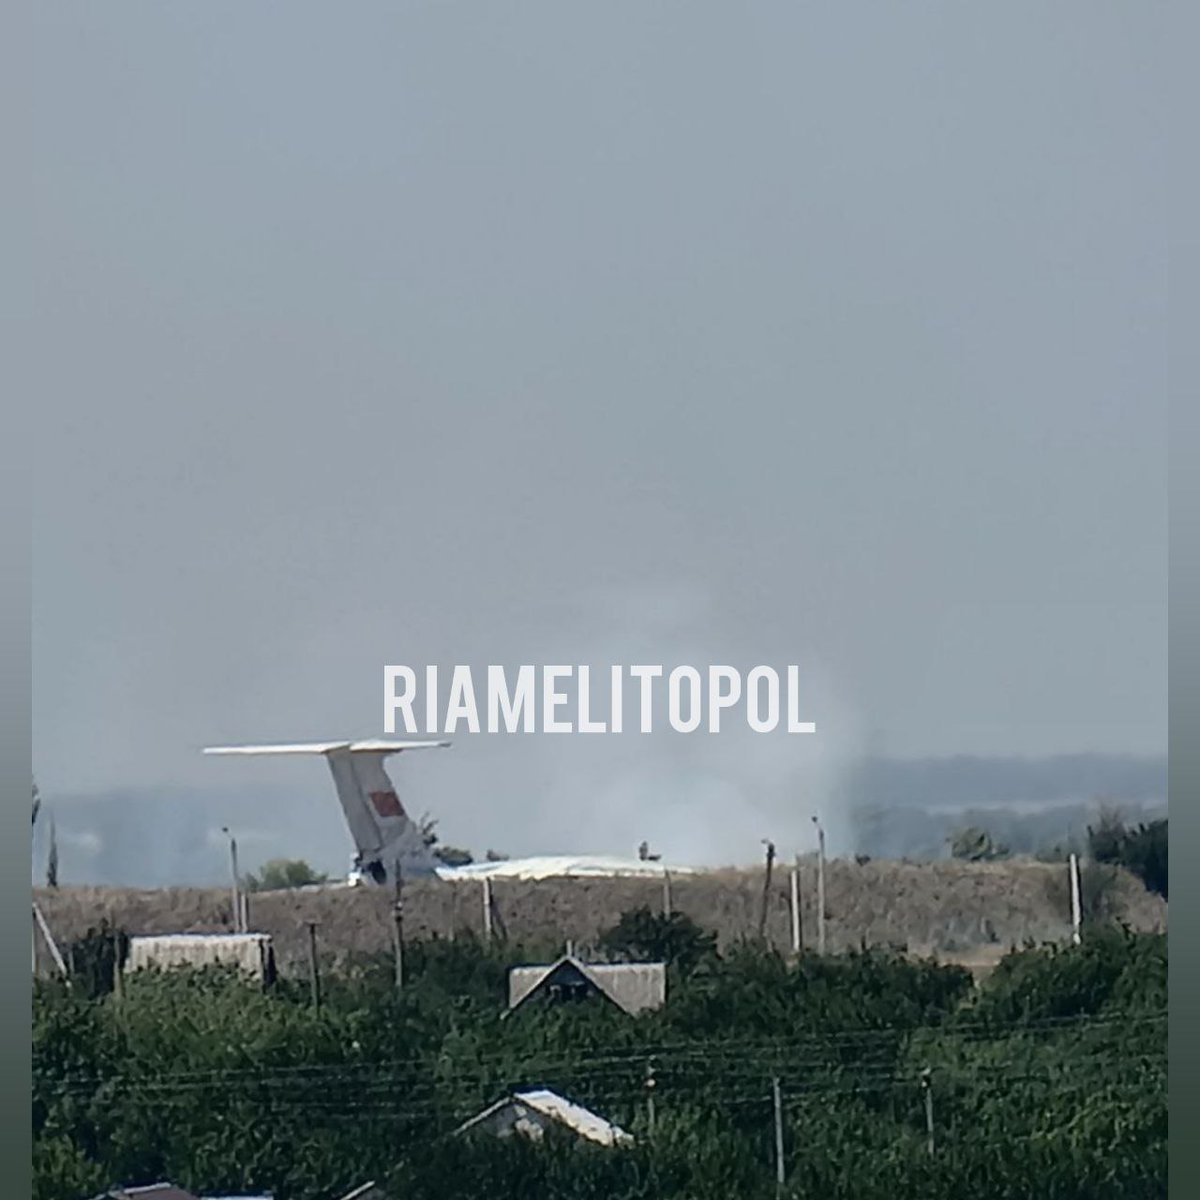 There was an explosion at the airfield in Melitopol,-local media reported. Details of the incident are not available at this time